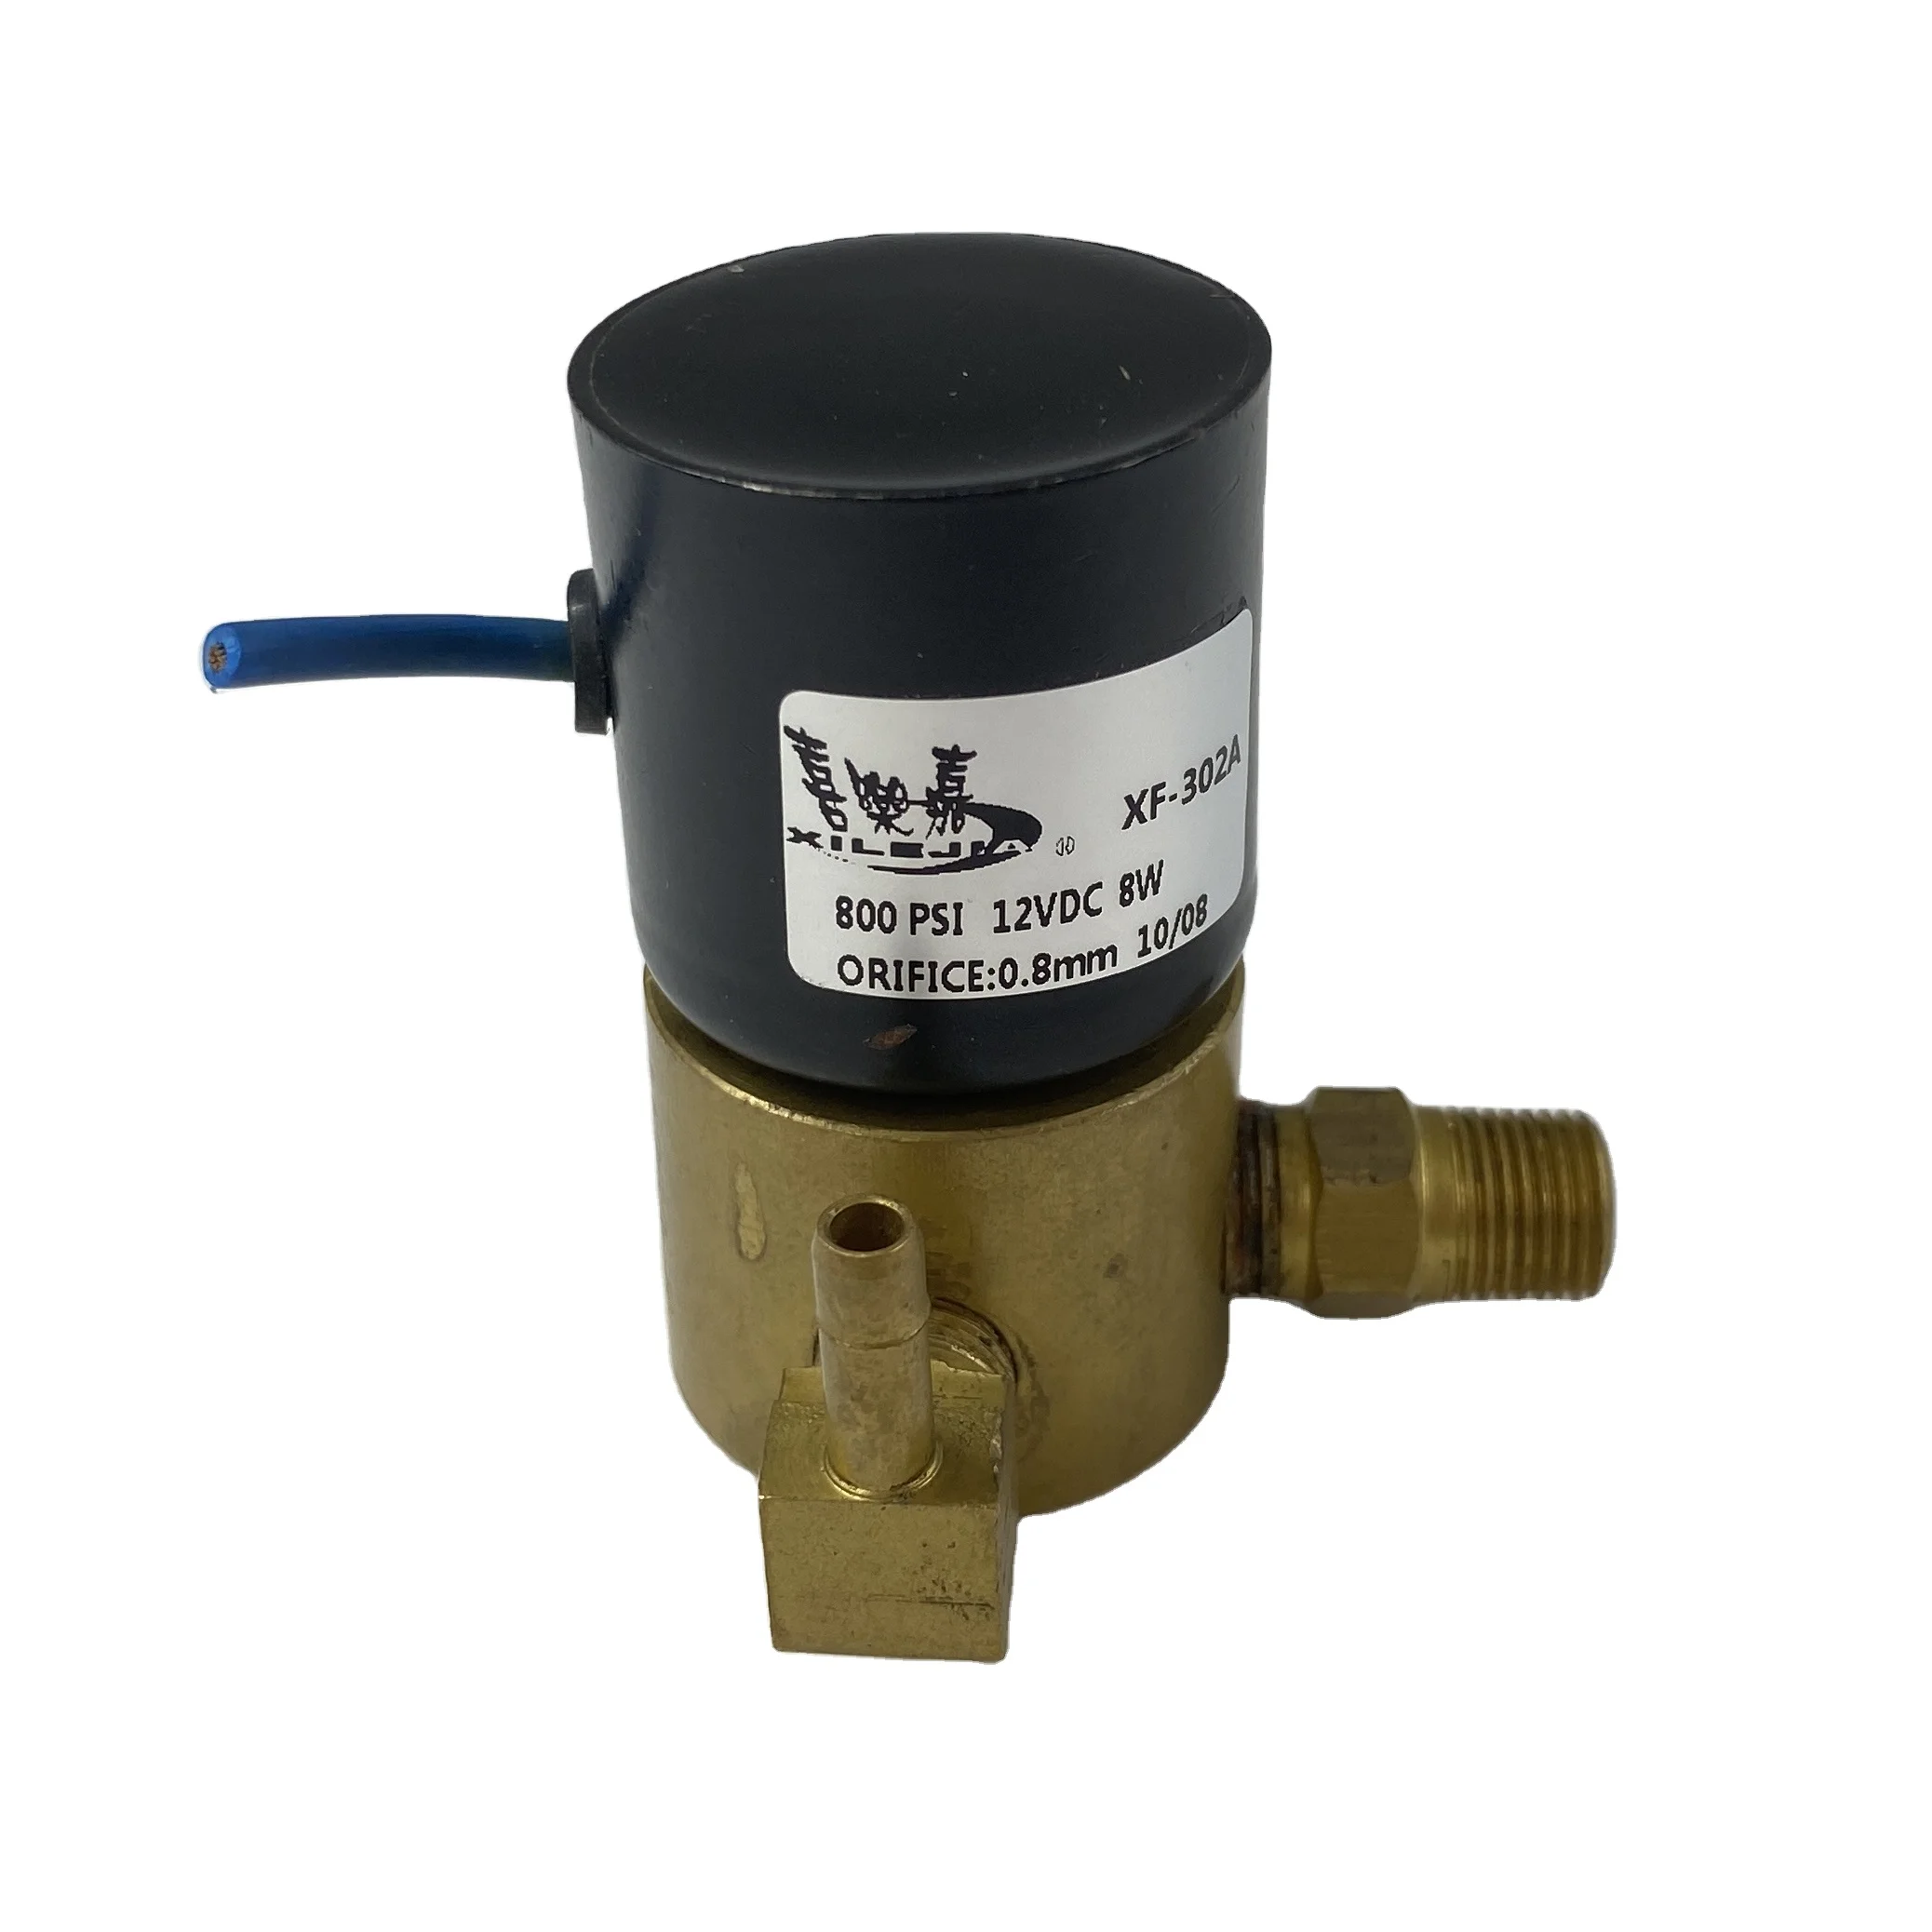 

Trailer buddy ufp electric reverse solenoid valve with fittings